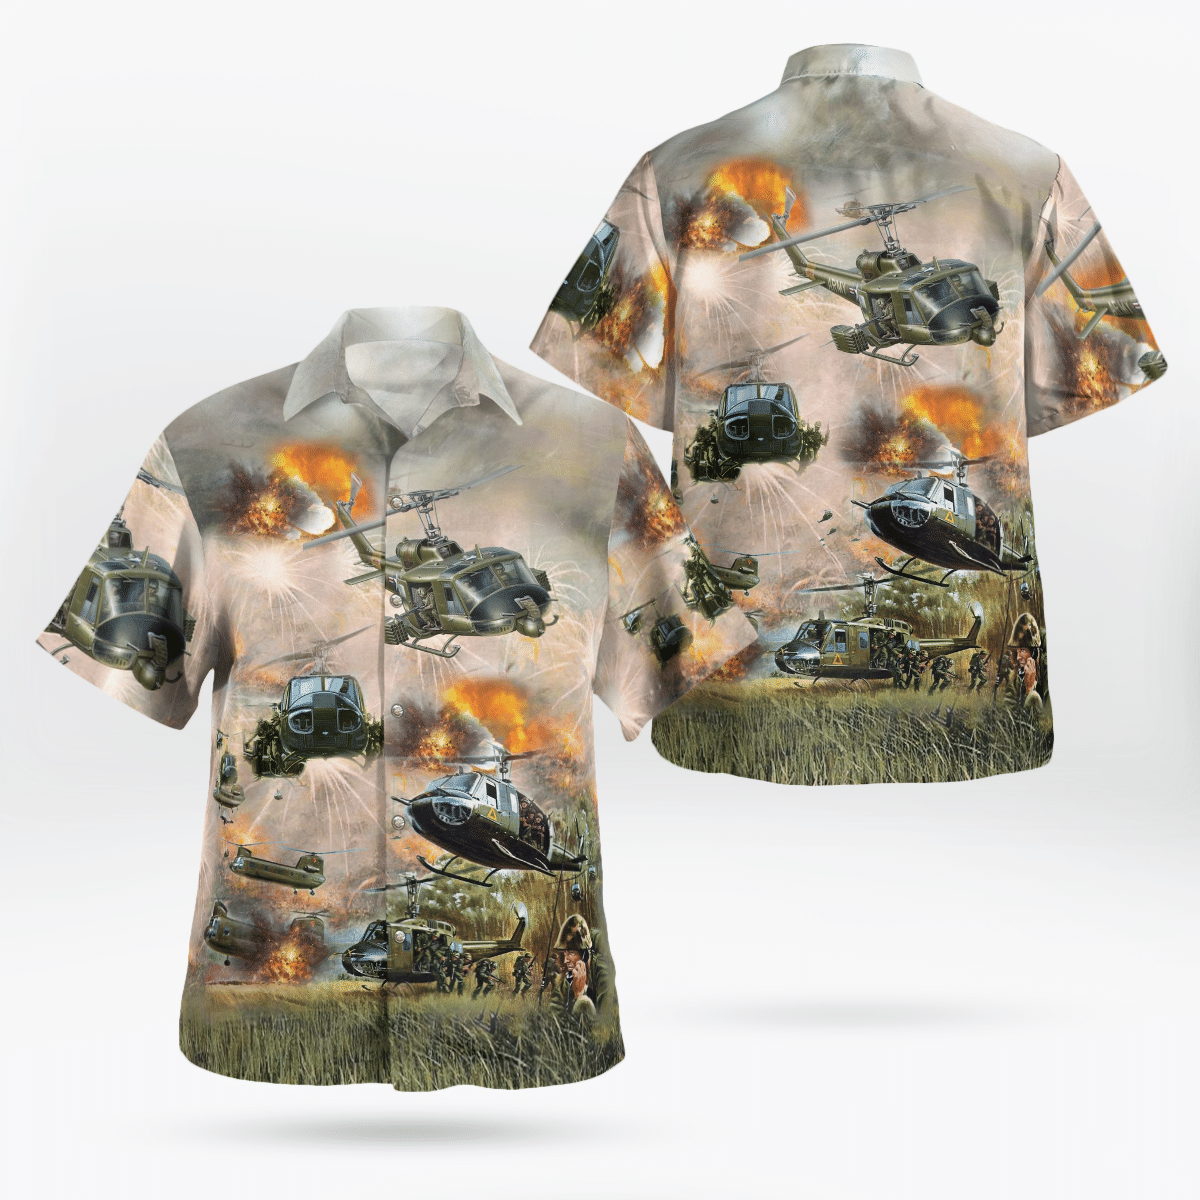 Consider getting these Hawaiian Shirt for your friends 93